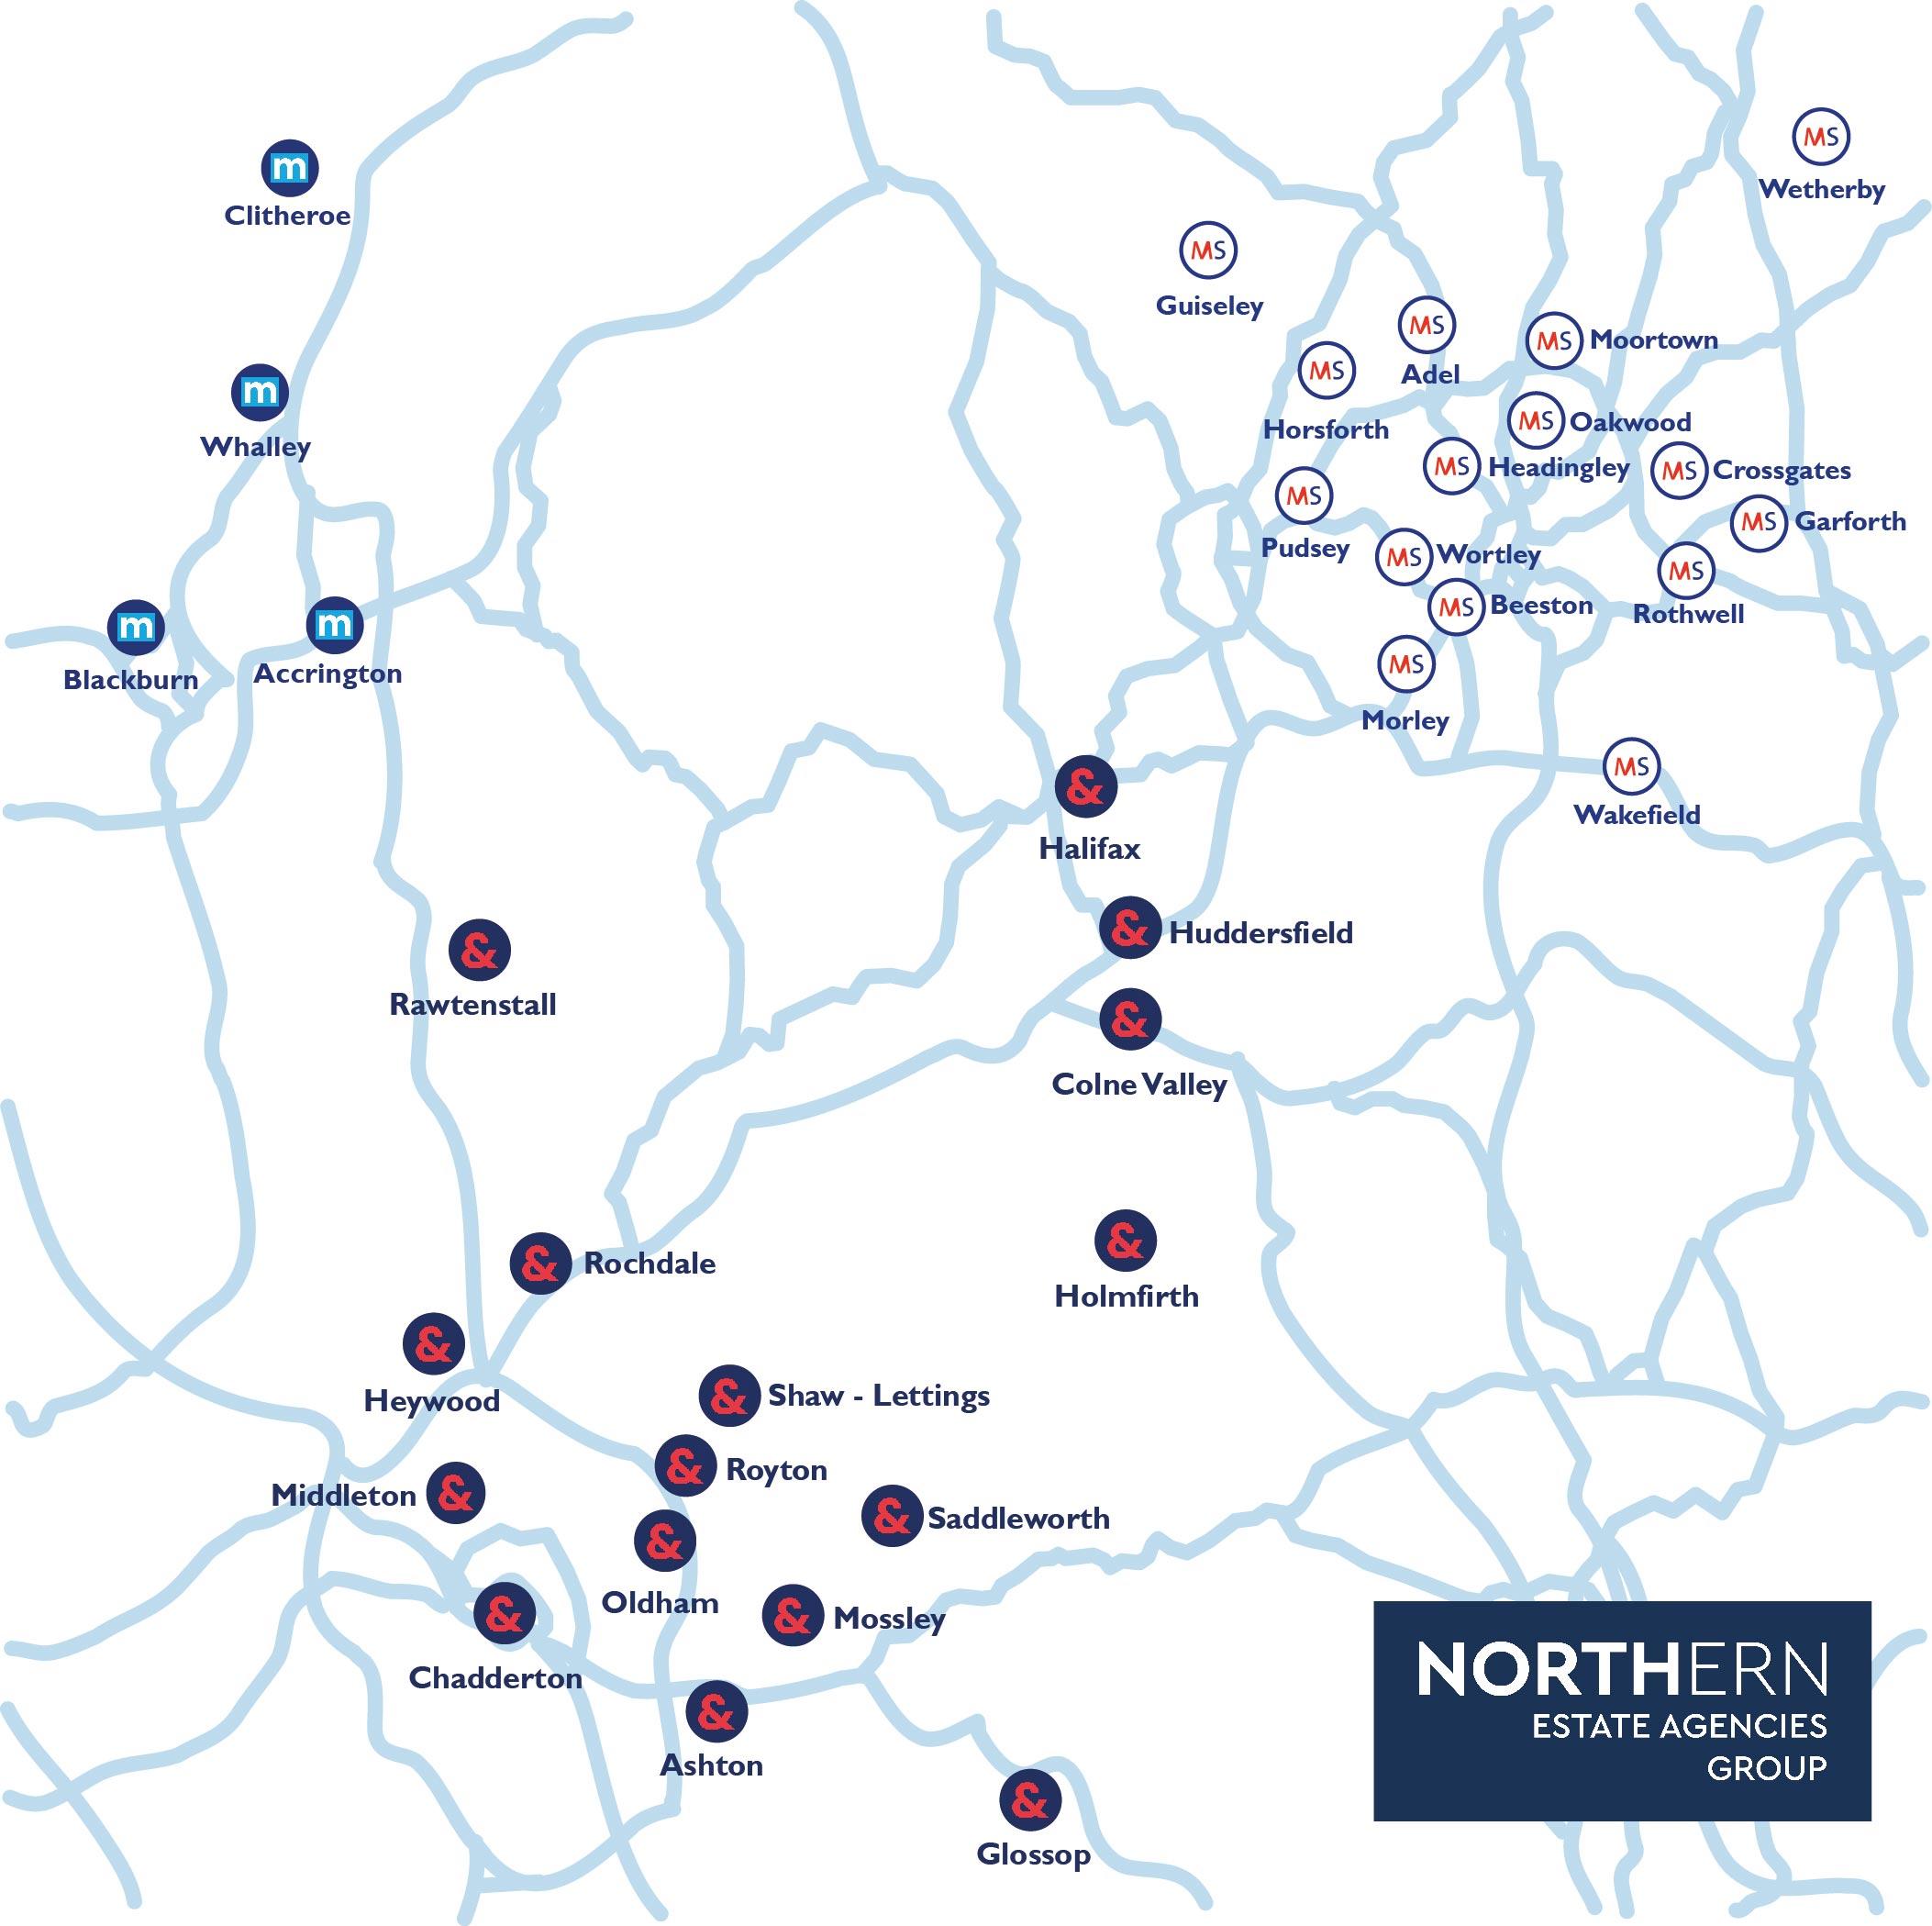 Northern Estate Agencies Group Map